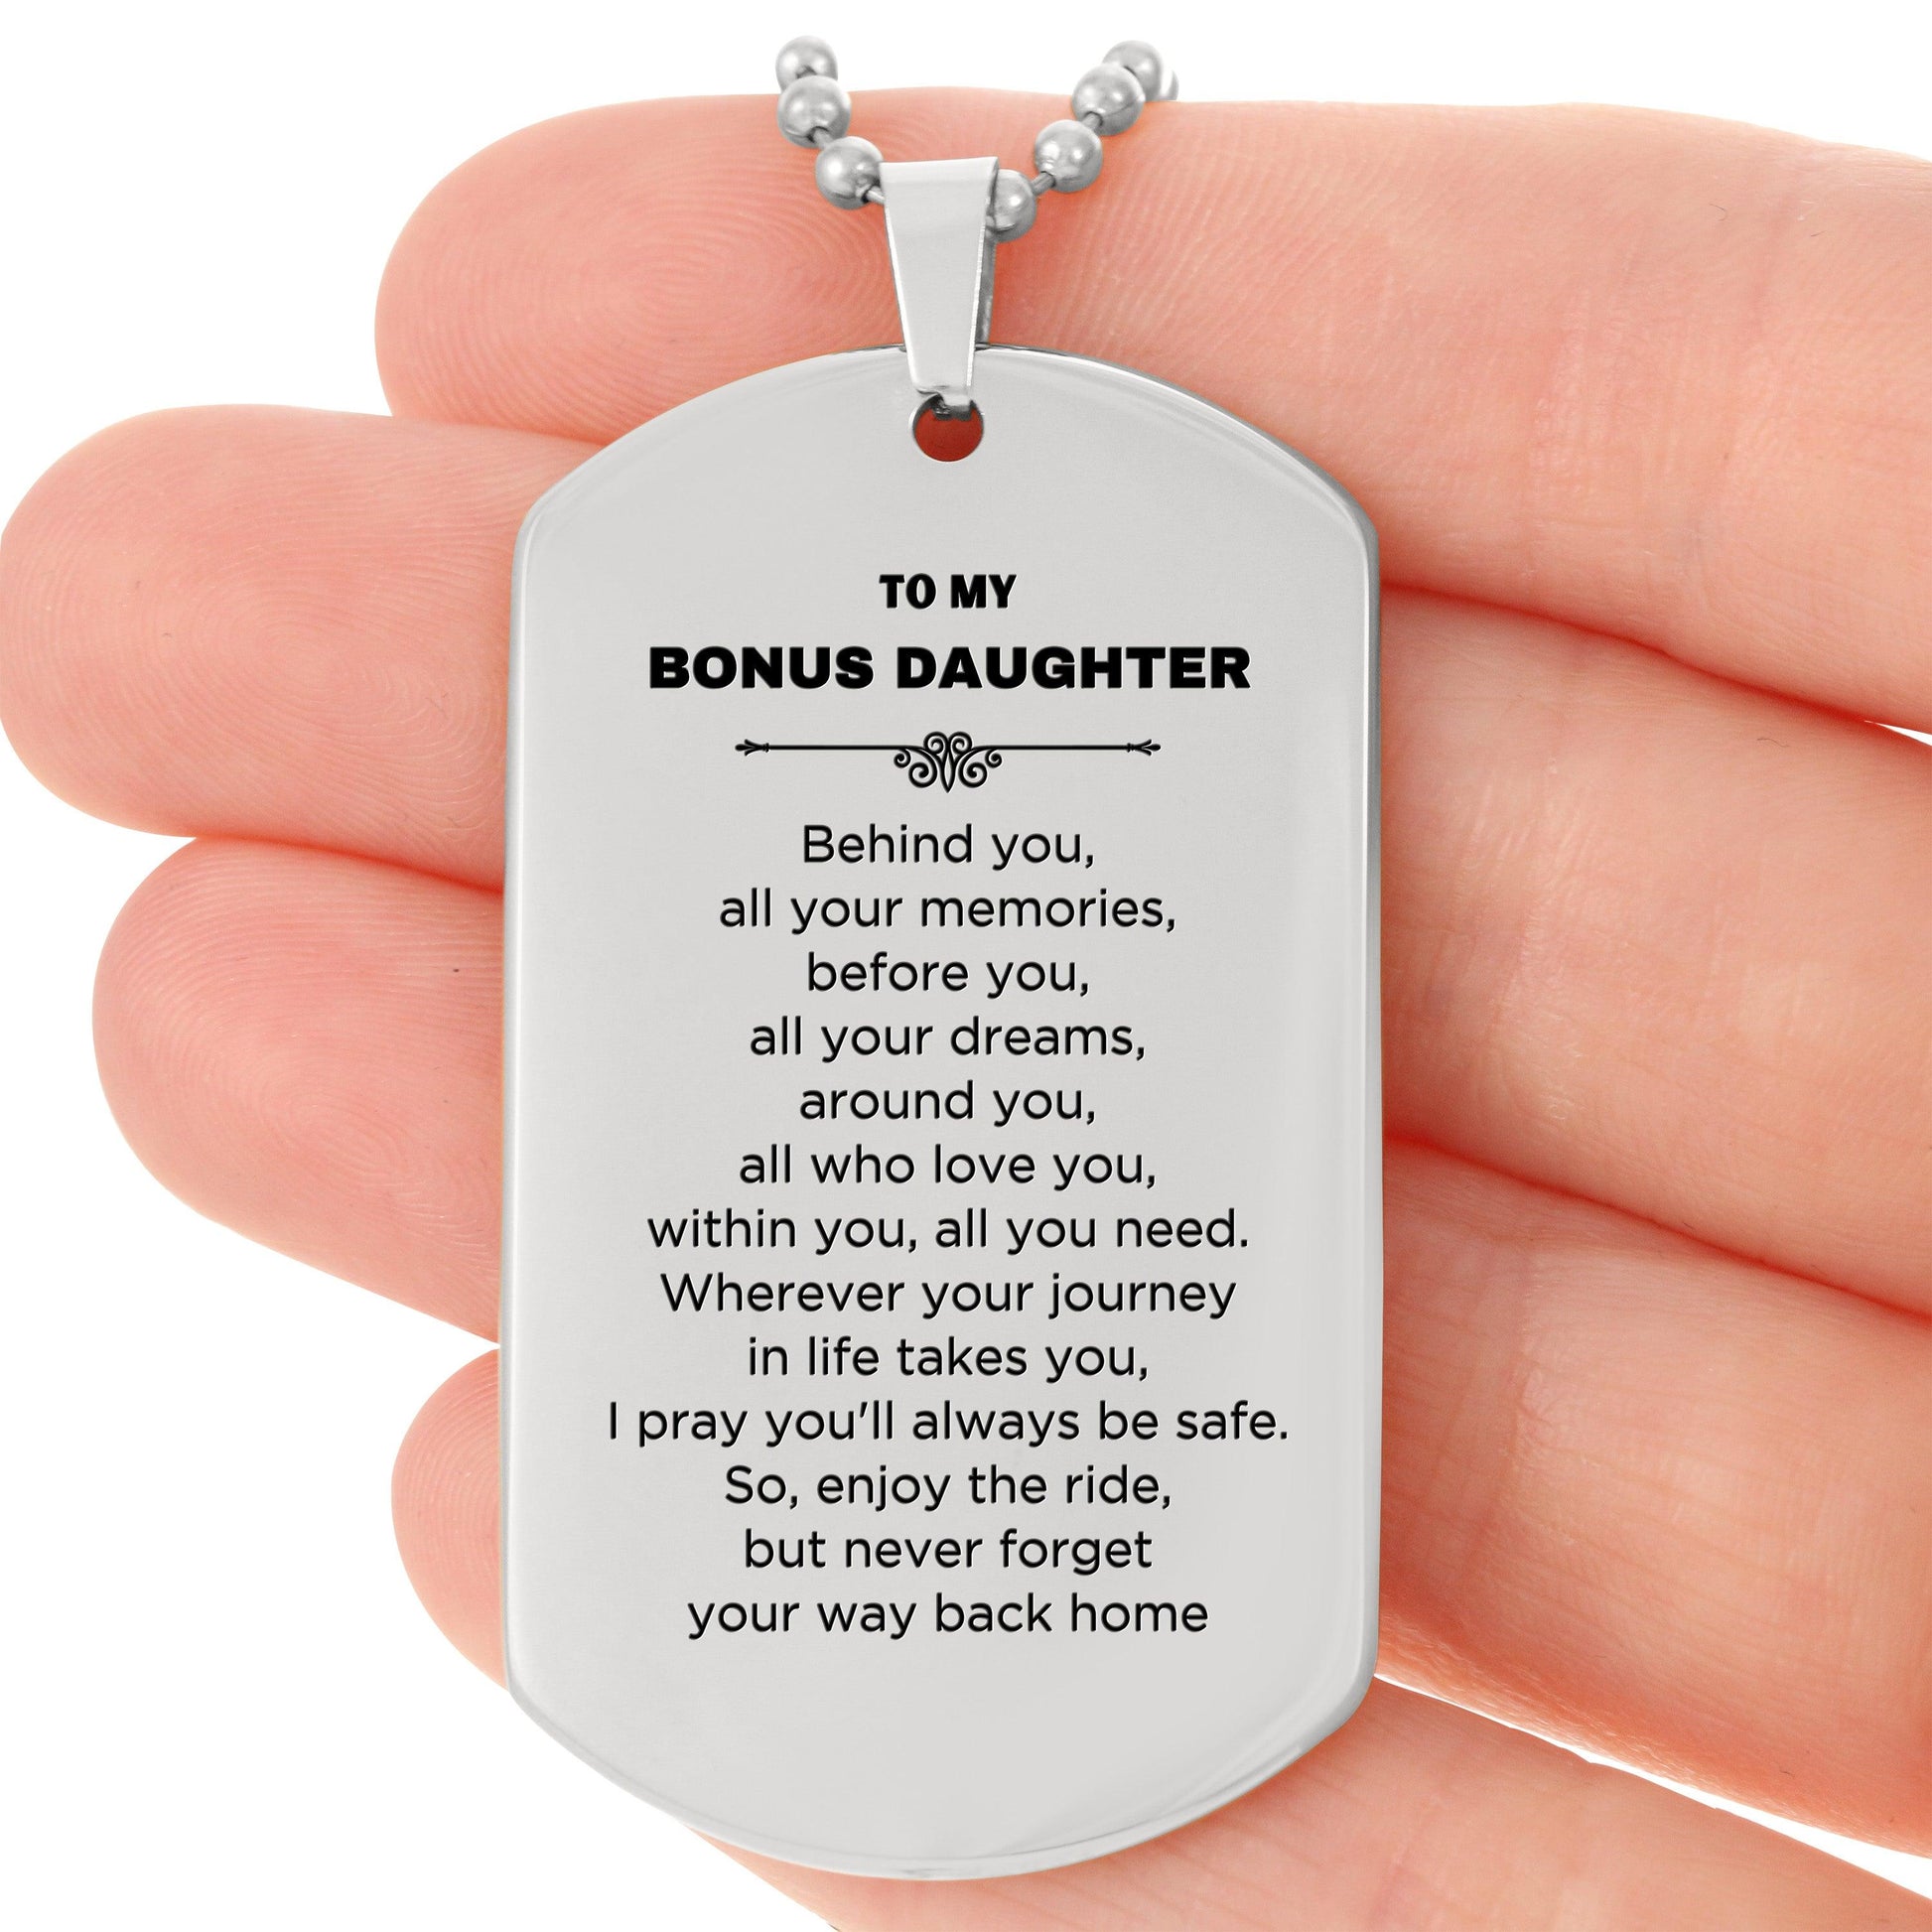 Bonus Daughter Silver Dog Tag Necklace Birthday Christmas Unique Gifts Behind you, all your memories, before you, all your dreams - Mallard Moon Gift Shop